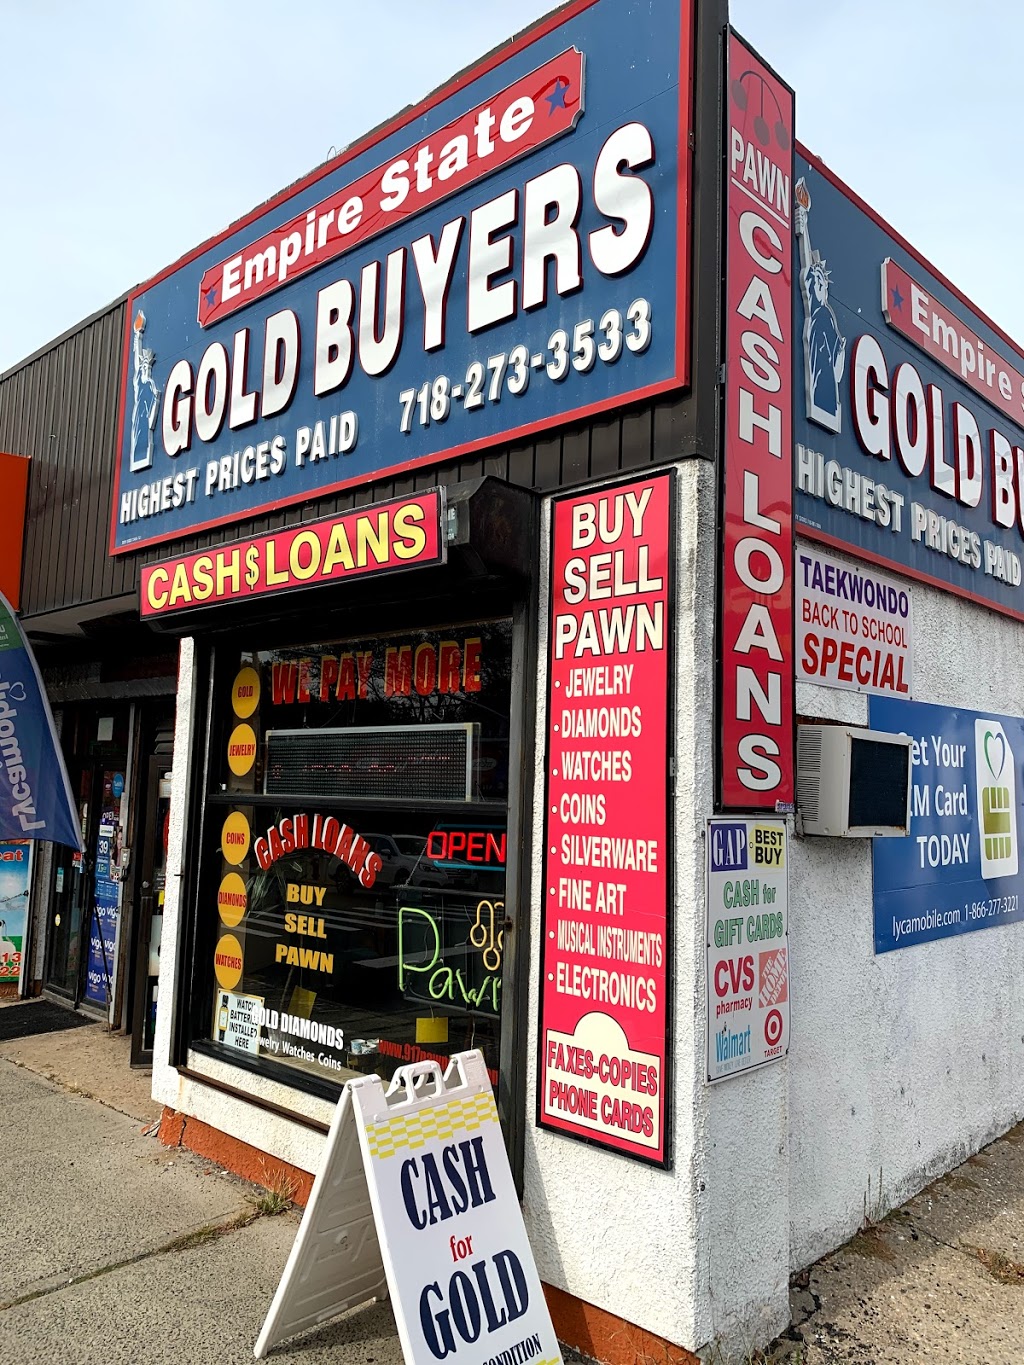 Empire State Gold Buyers / 917pawnshop | 1891 Victory Blvd, Staten Island, NY 10314 | Phone: (718) 273-3533